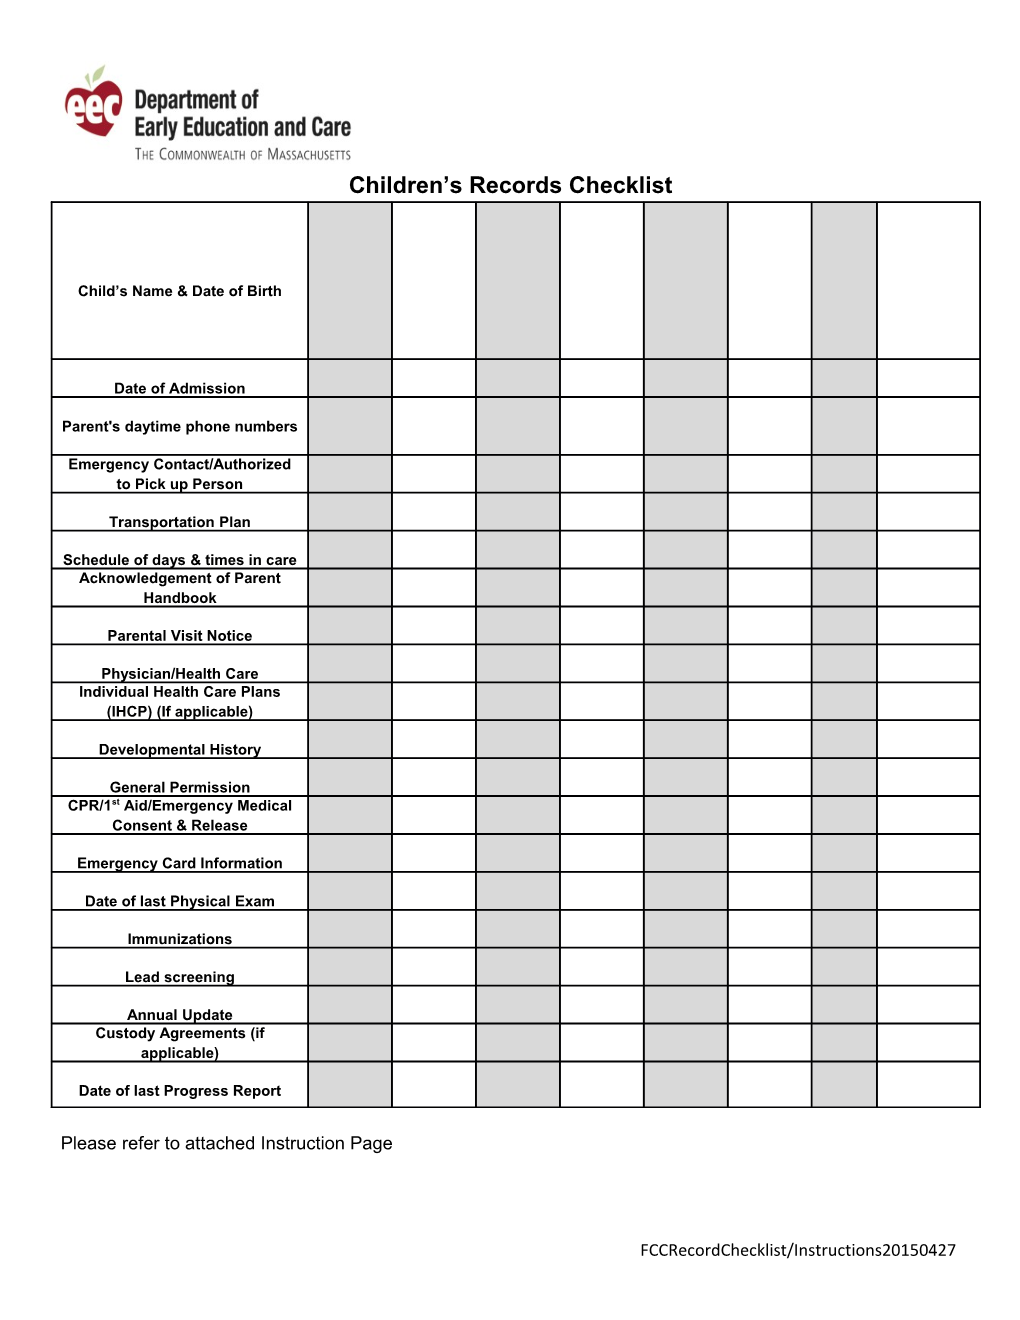 Childrens Records Checklist and Instructions